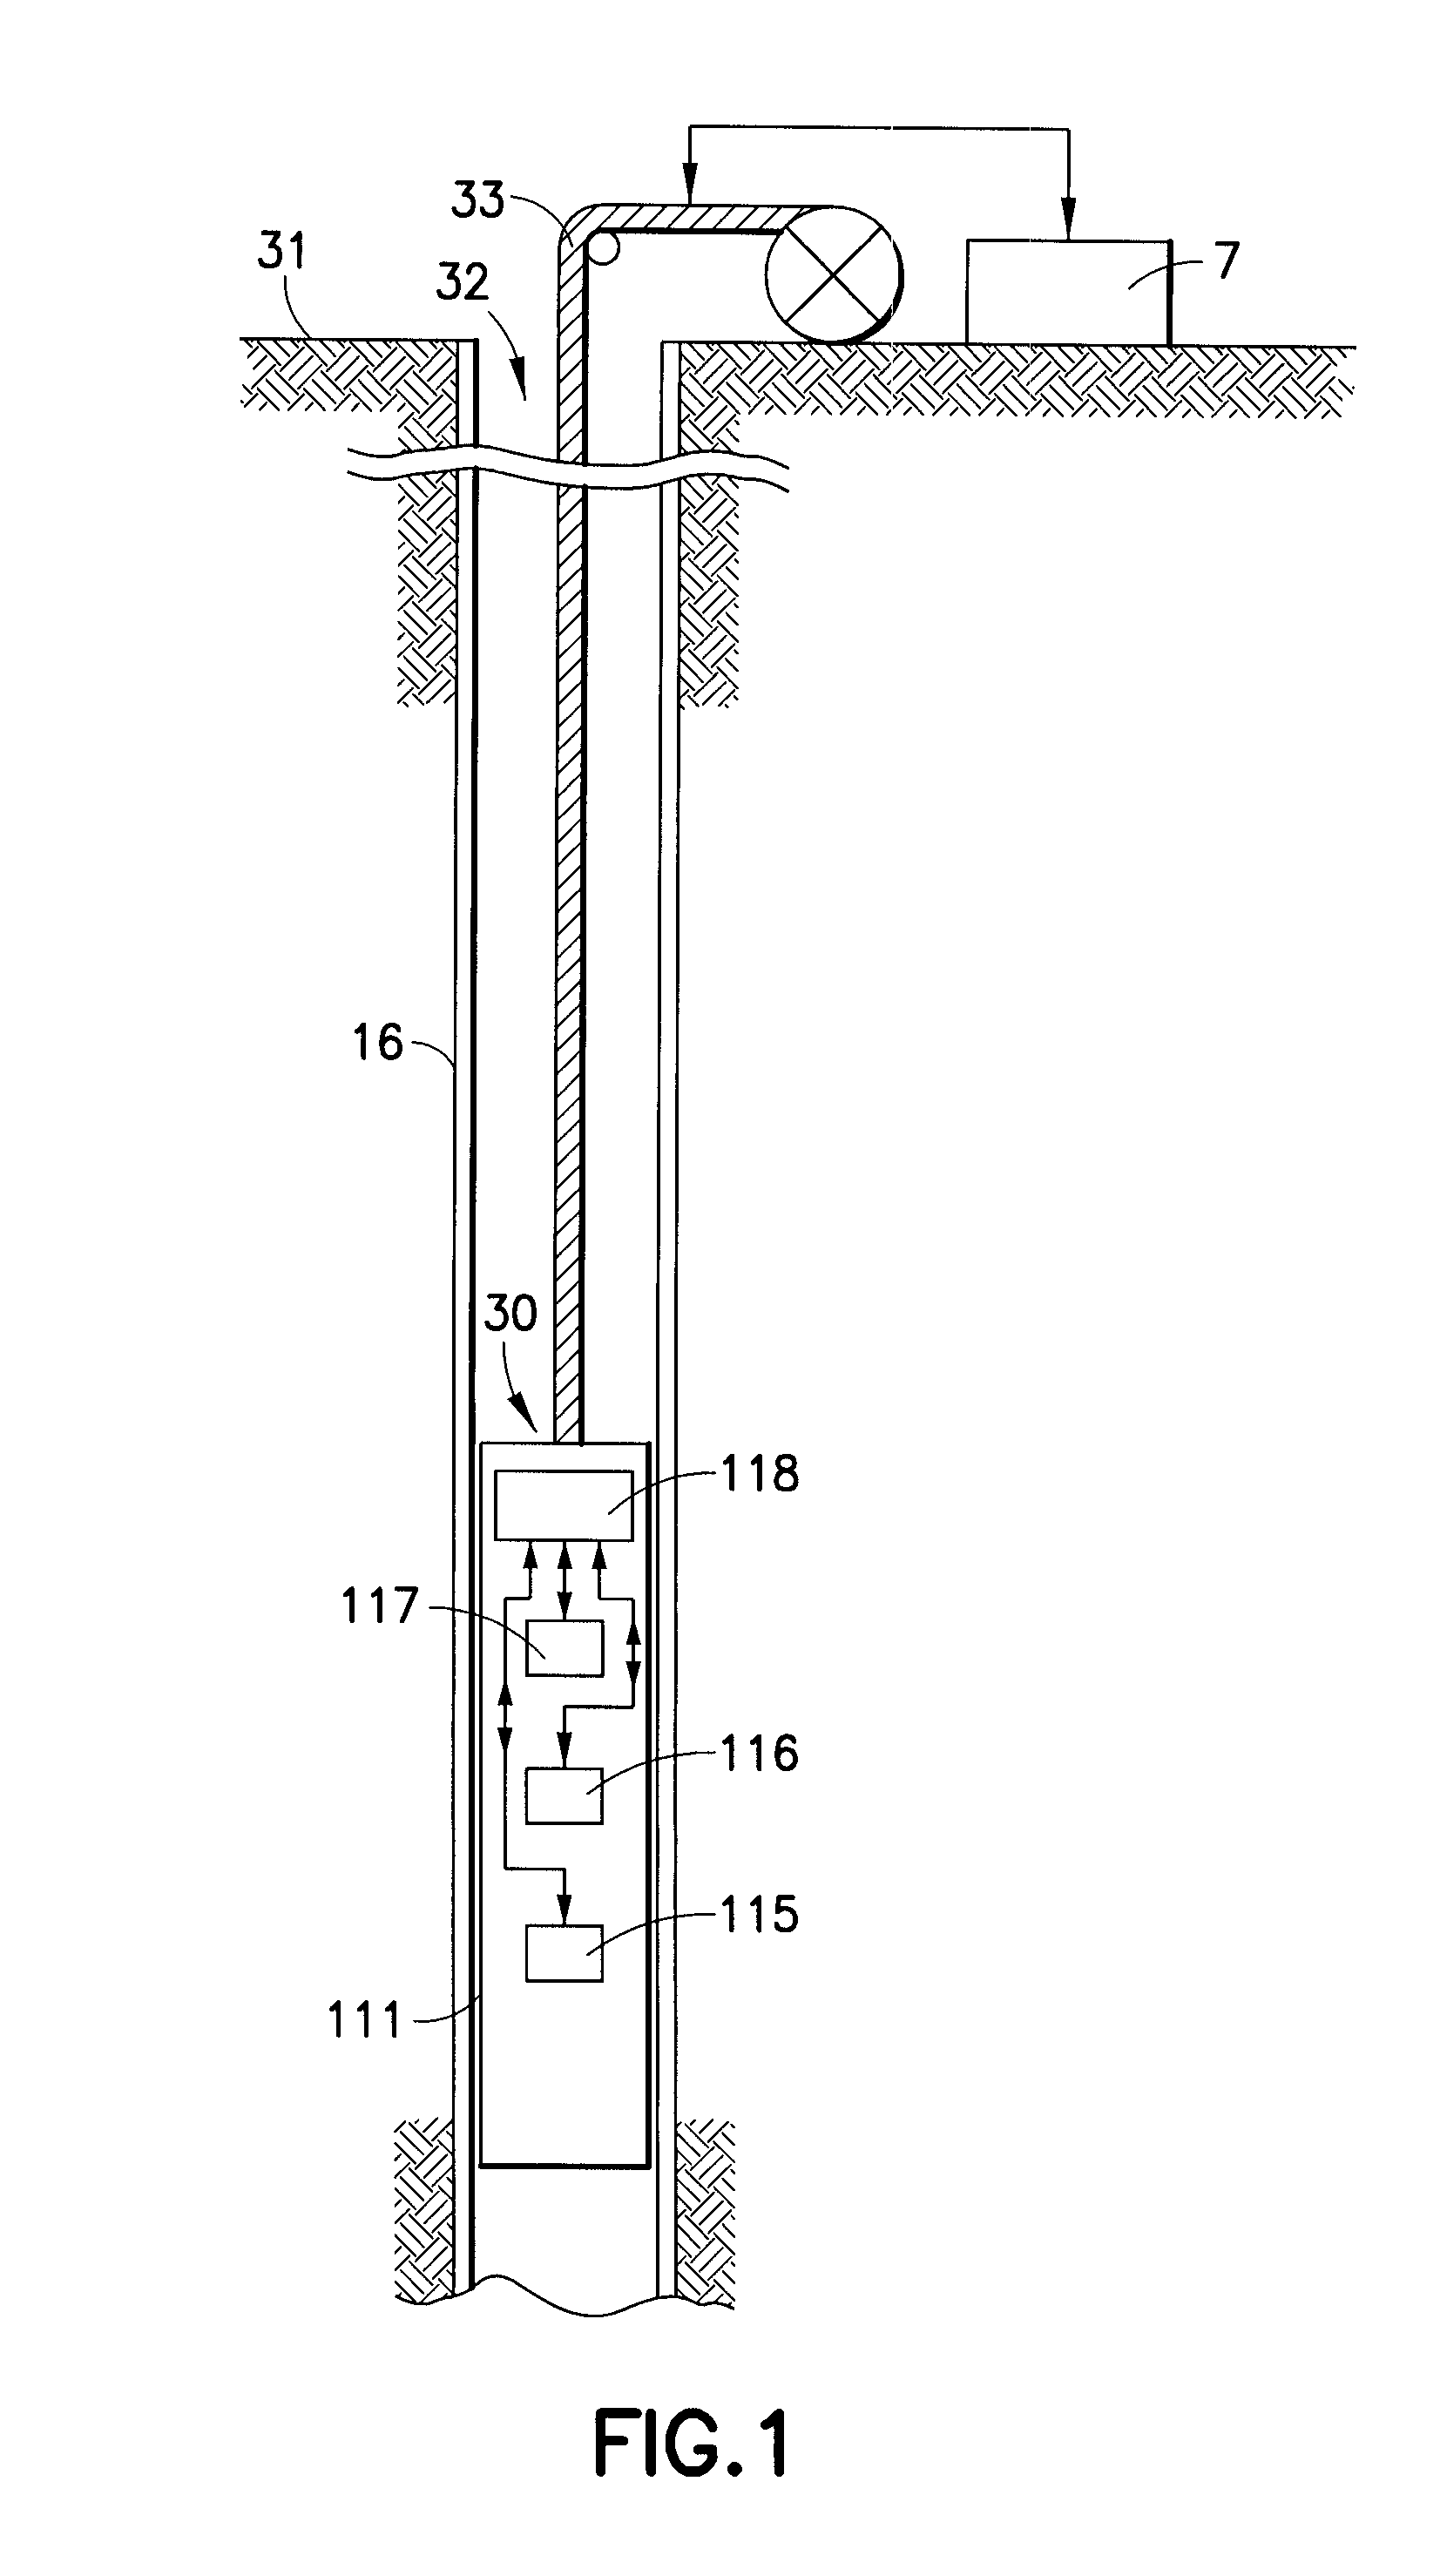 Well logging method for determining formation characteristics using pulsed neutron capture measurements